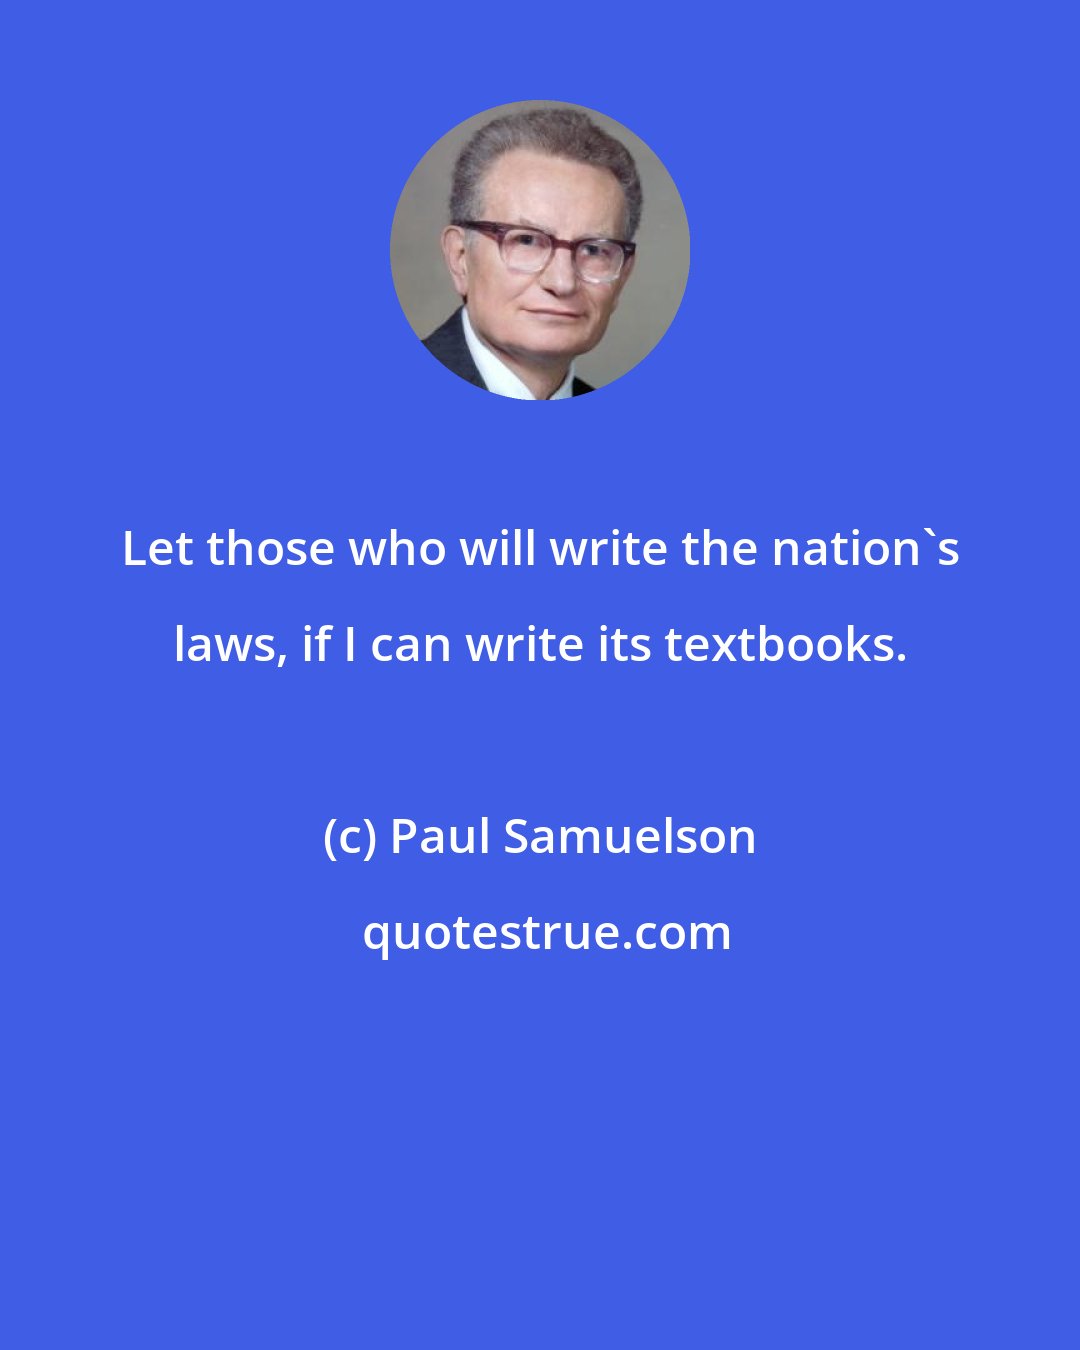 Paul Samuelson: Let those who will write the nation's laws, if I can write its textbooks.